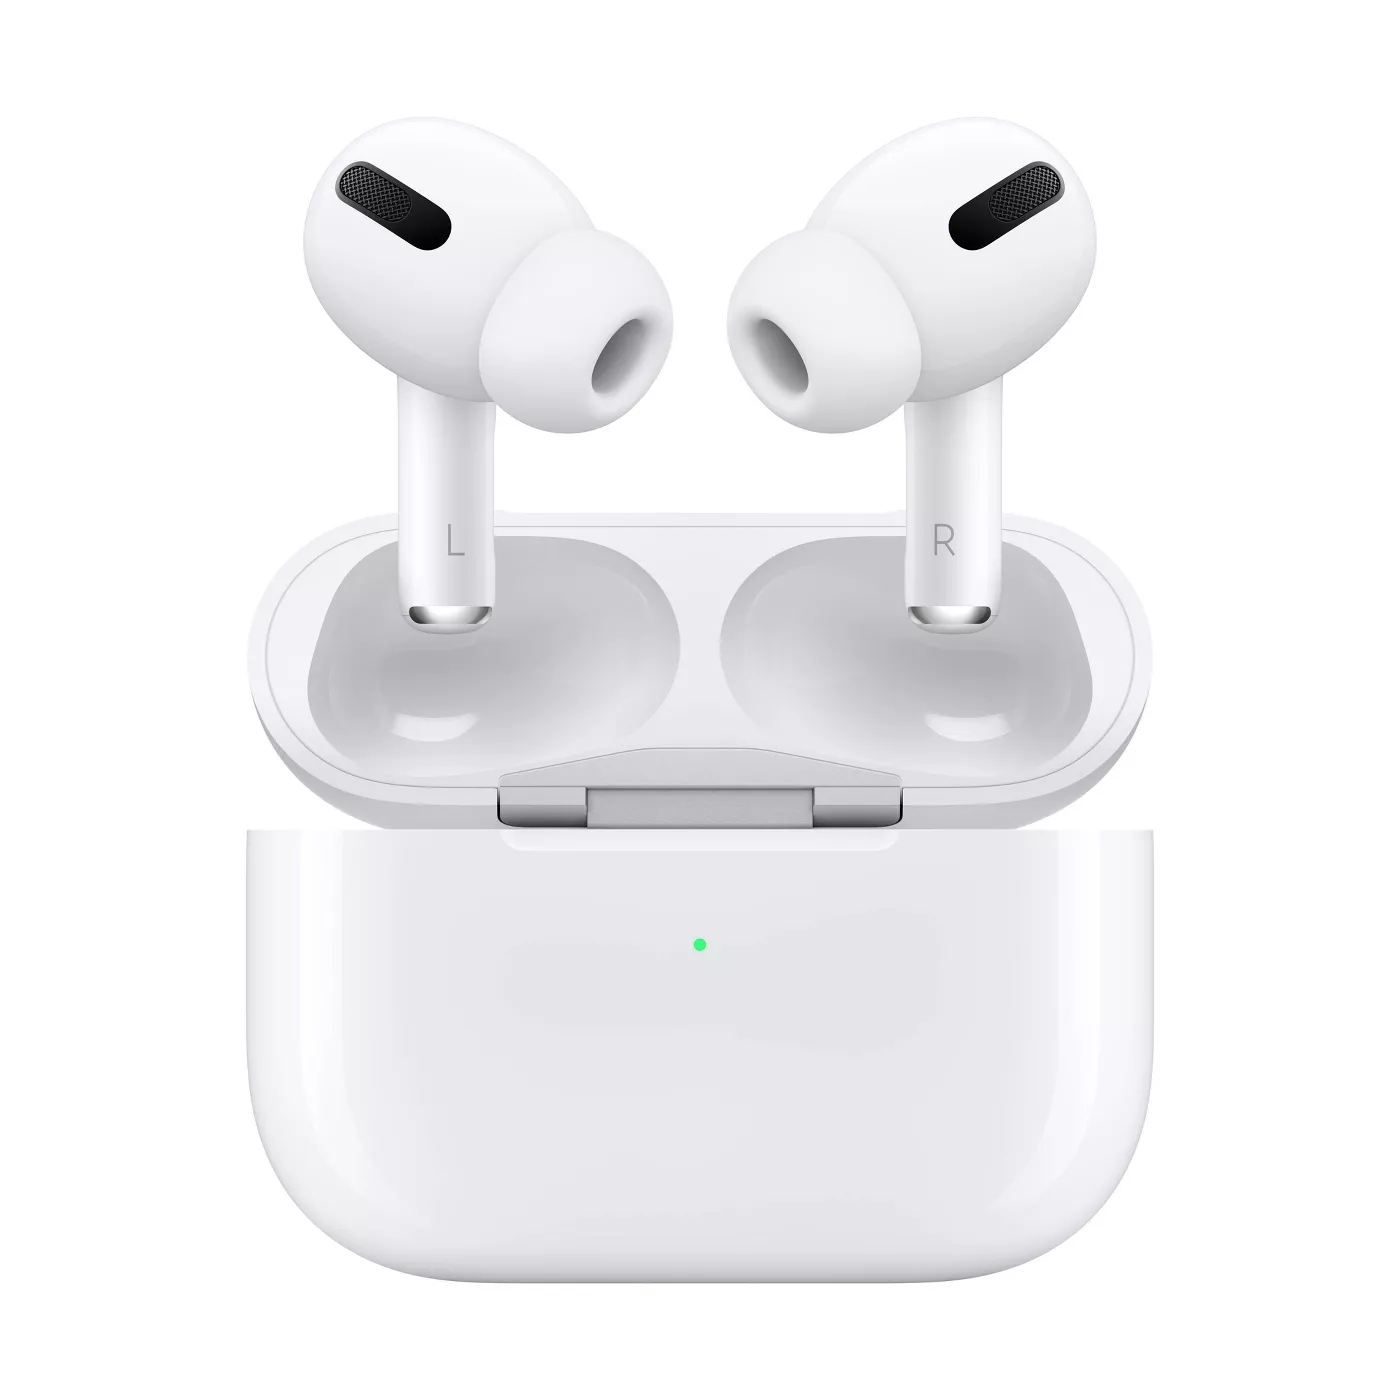 Apple AirPods Pro - image 1 of 9